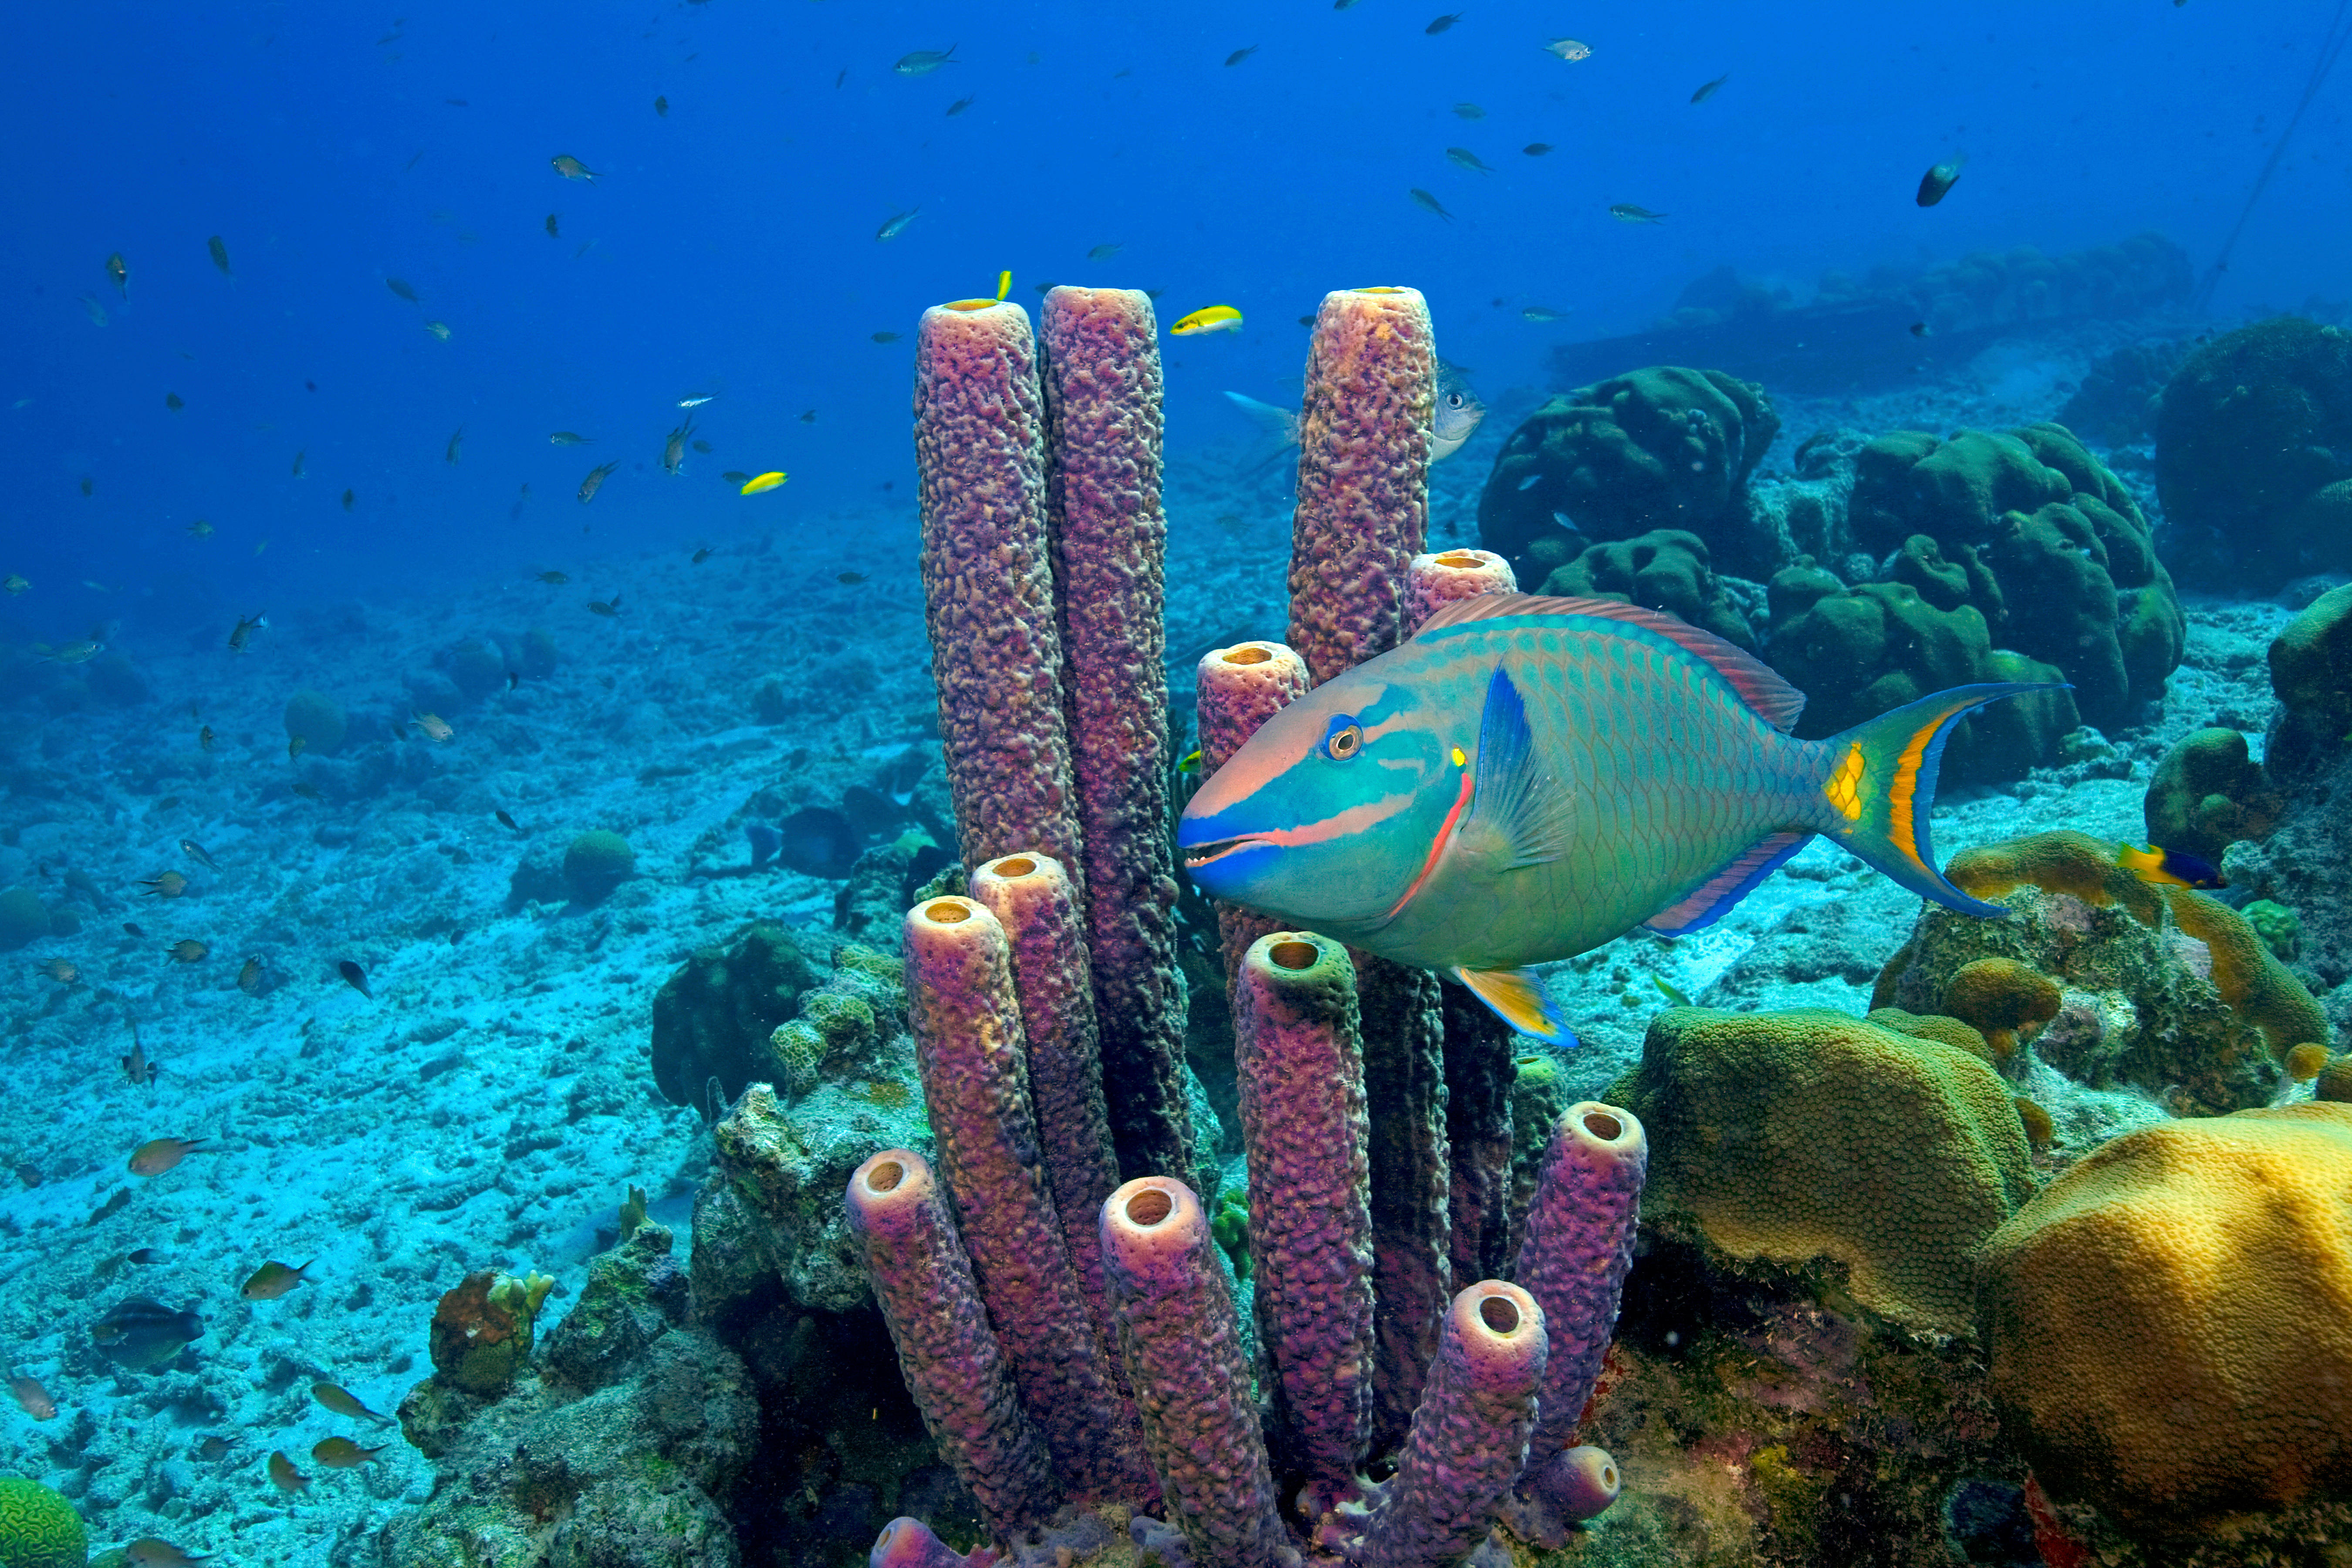 The Most Beautiful Coral Reefs in the World